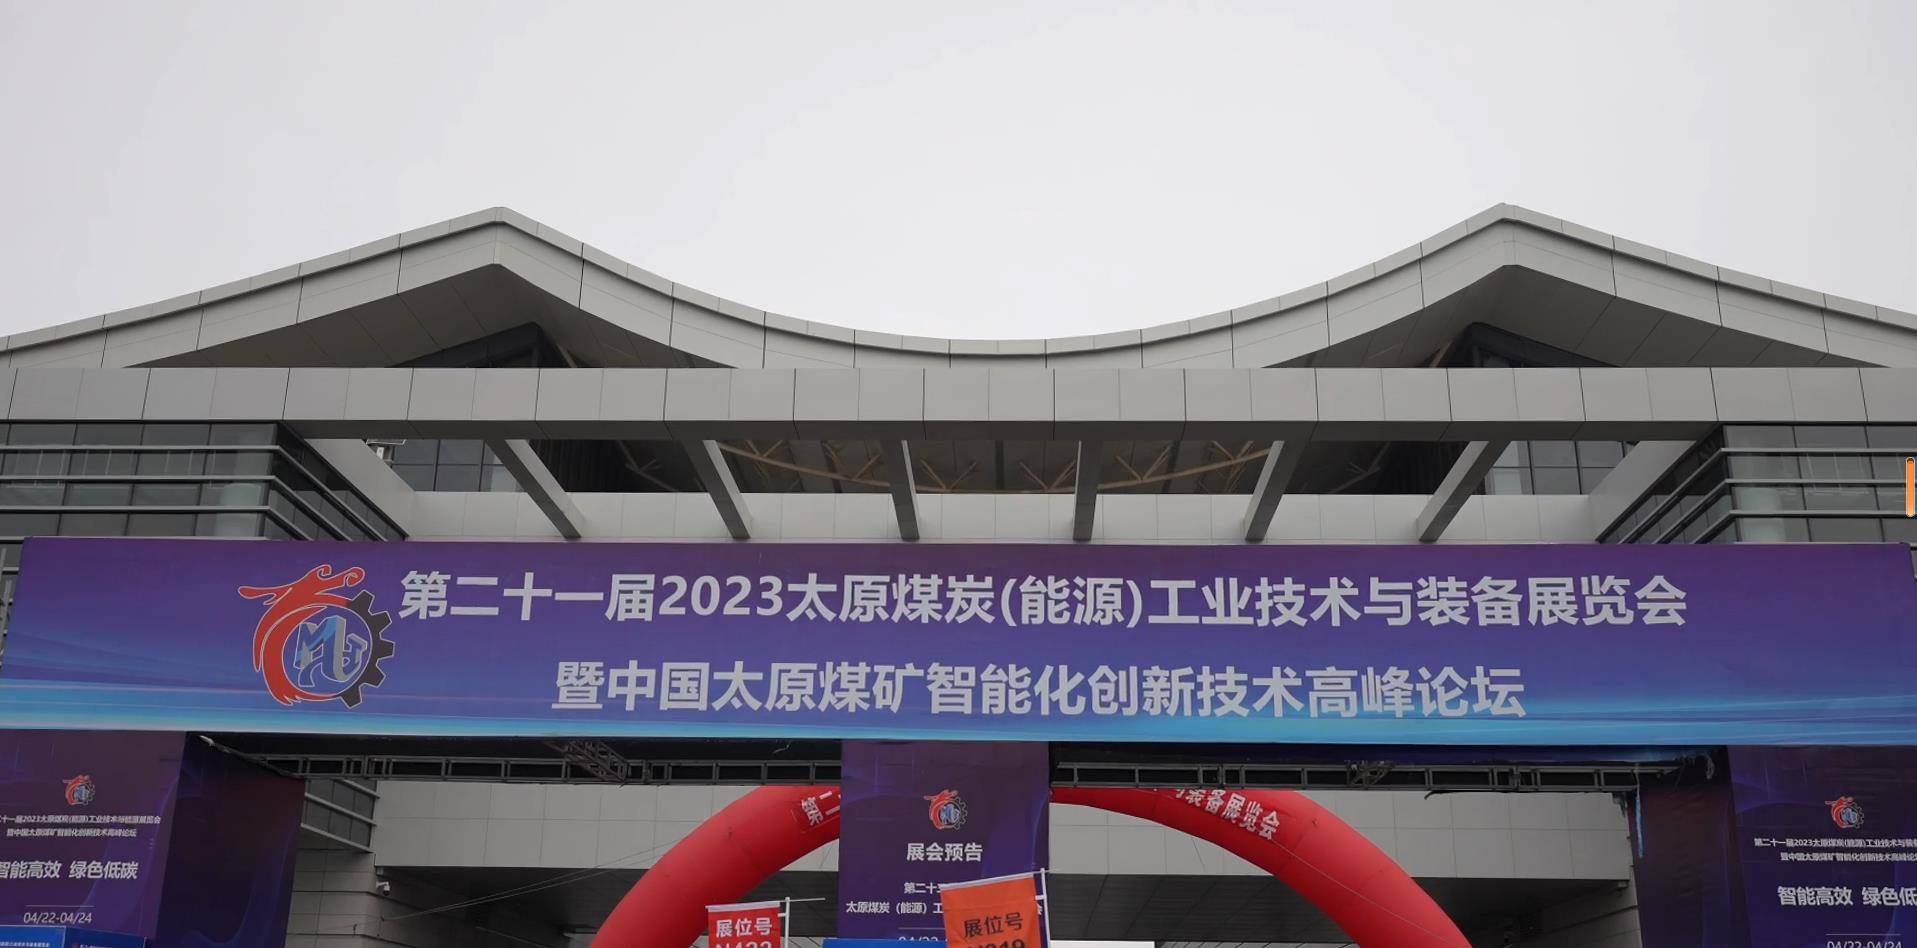 The 21st 2023 Taiyuan Coal (Energy) Industry Technology and Equipment Exhibition(图1)